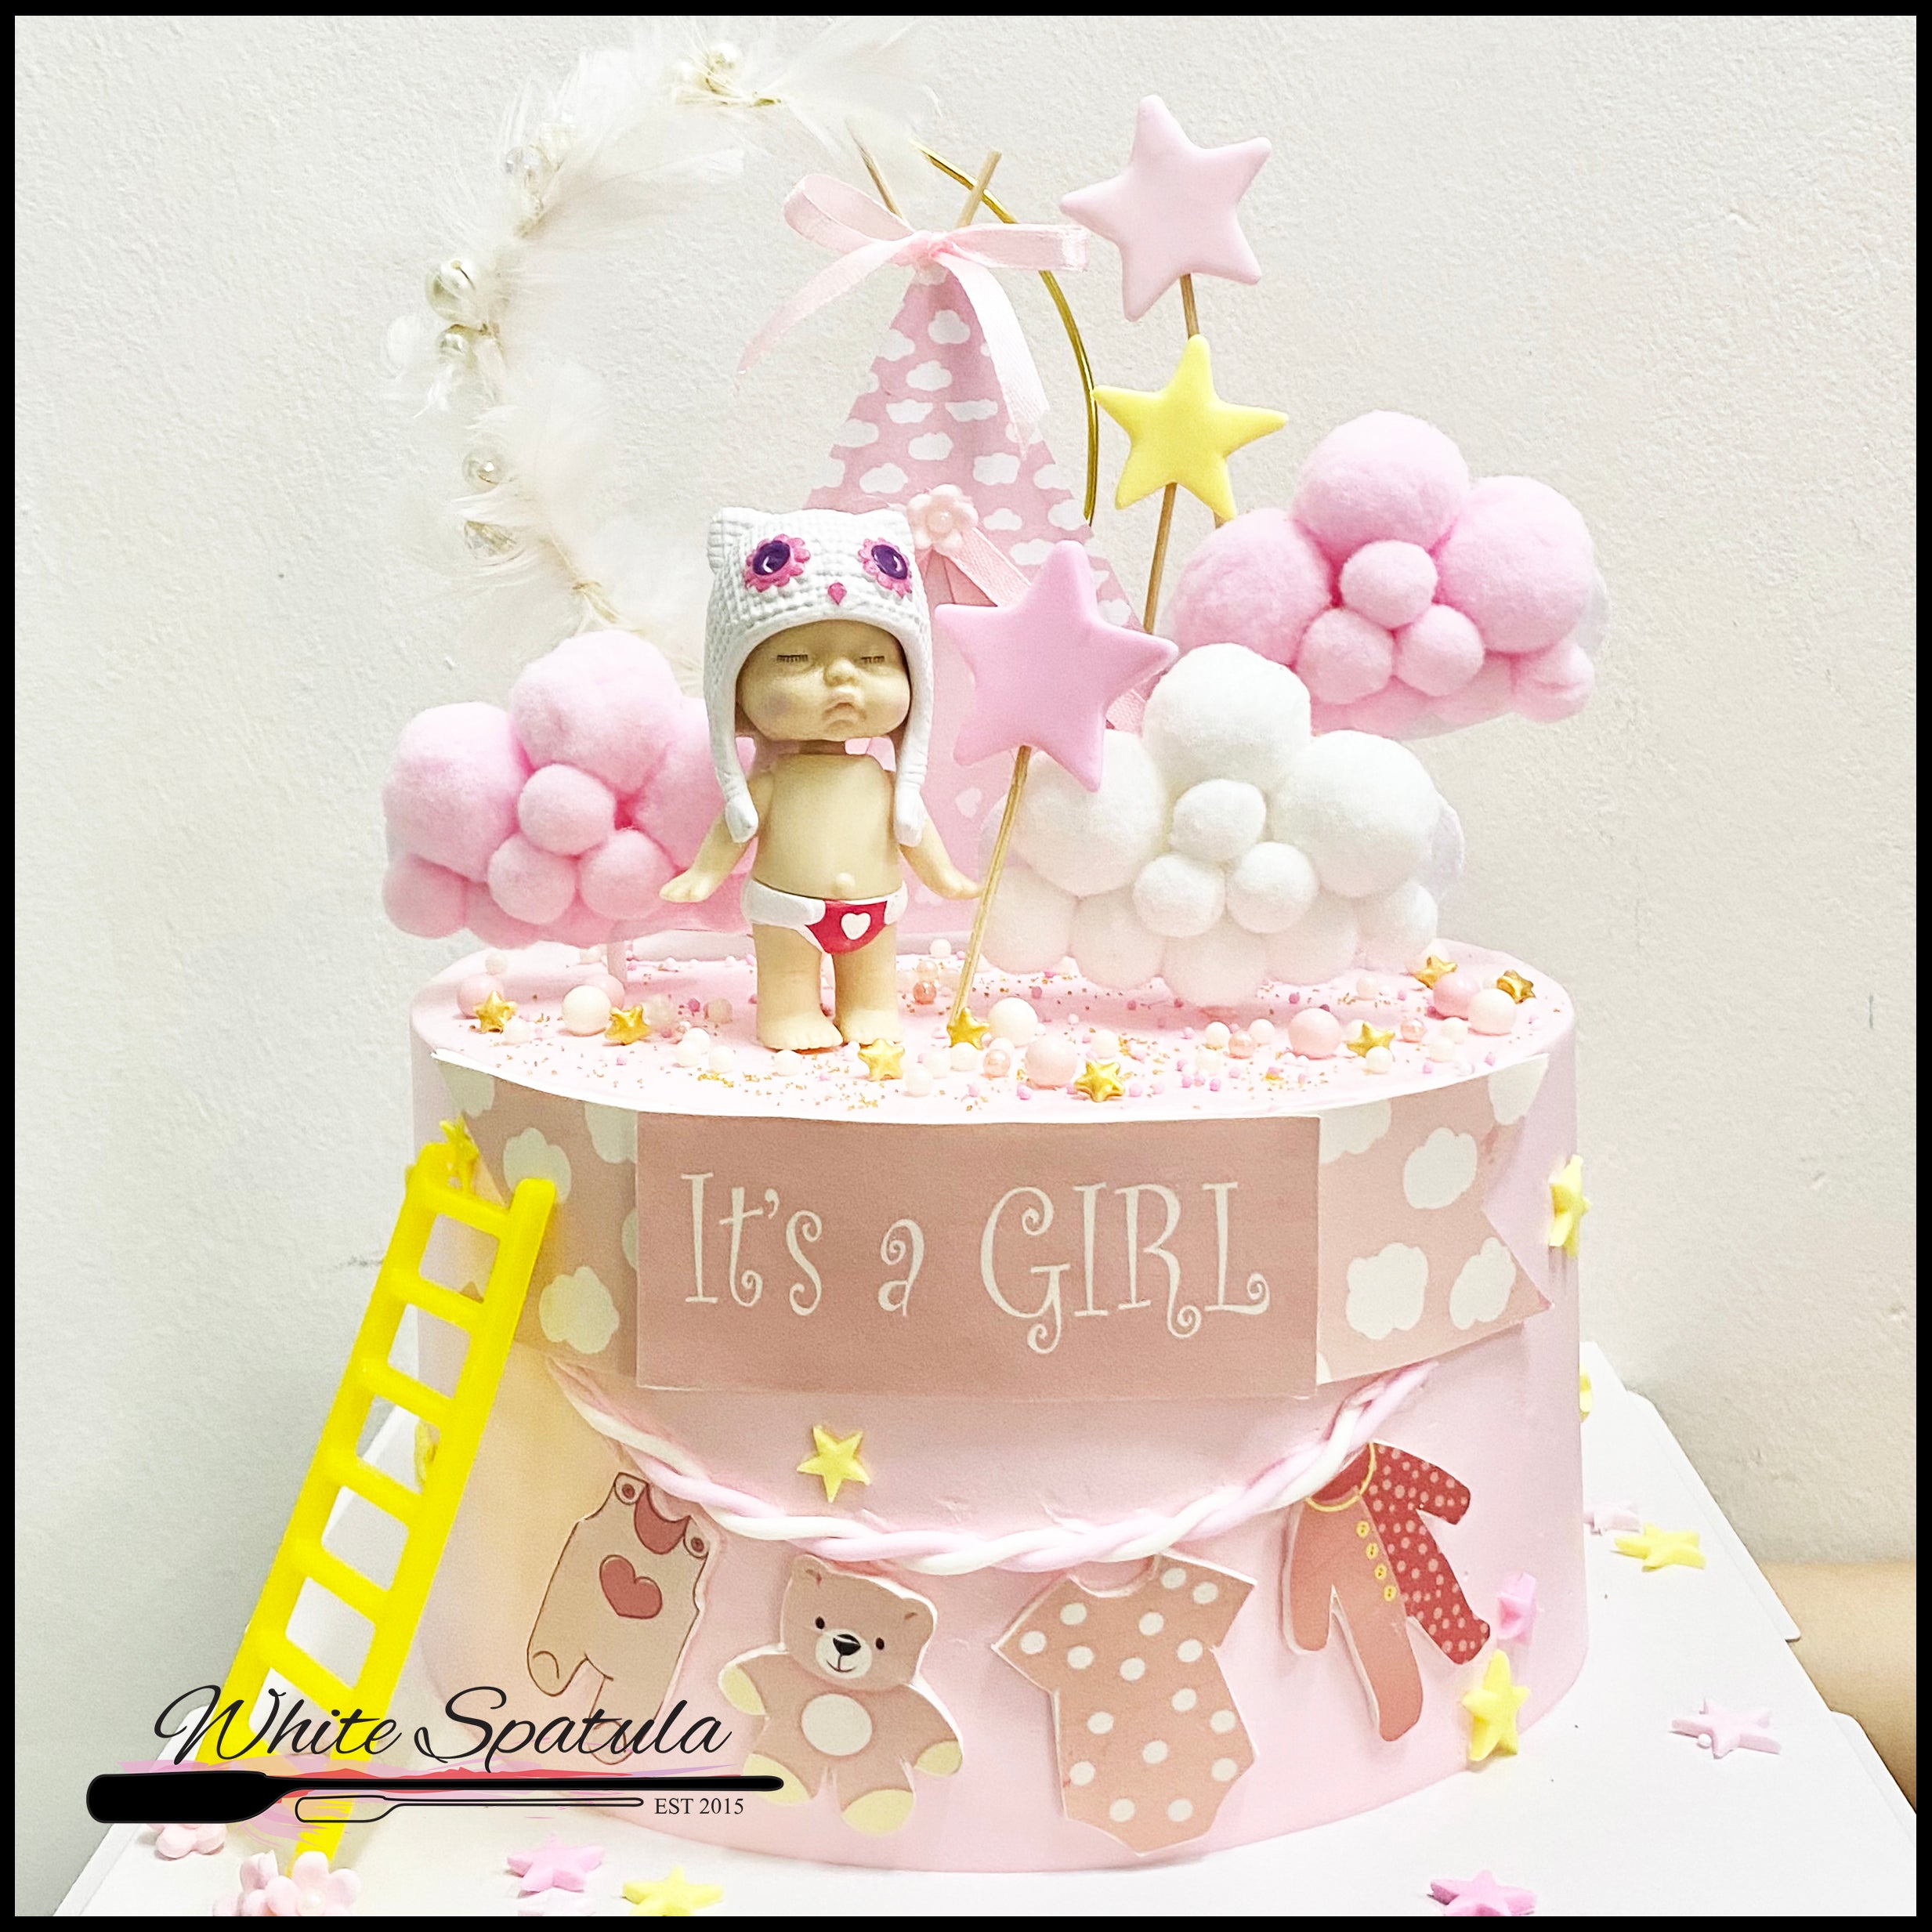 M782) Welcome Baby Cake (1kg) – Tricity 24